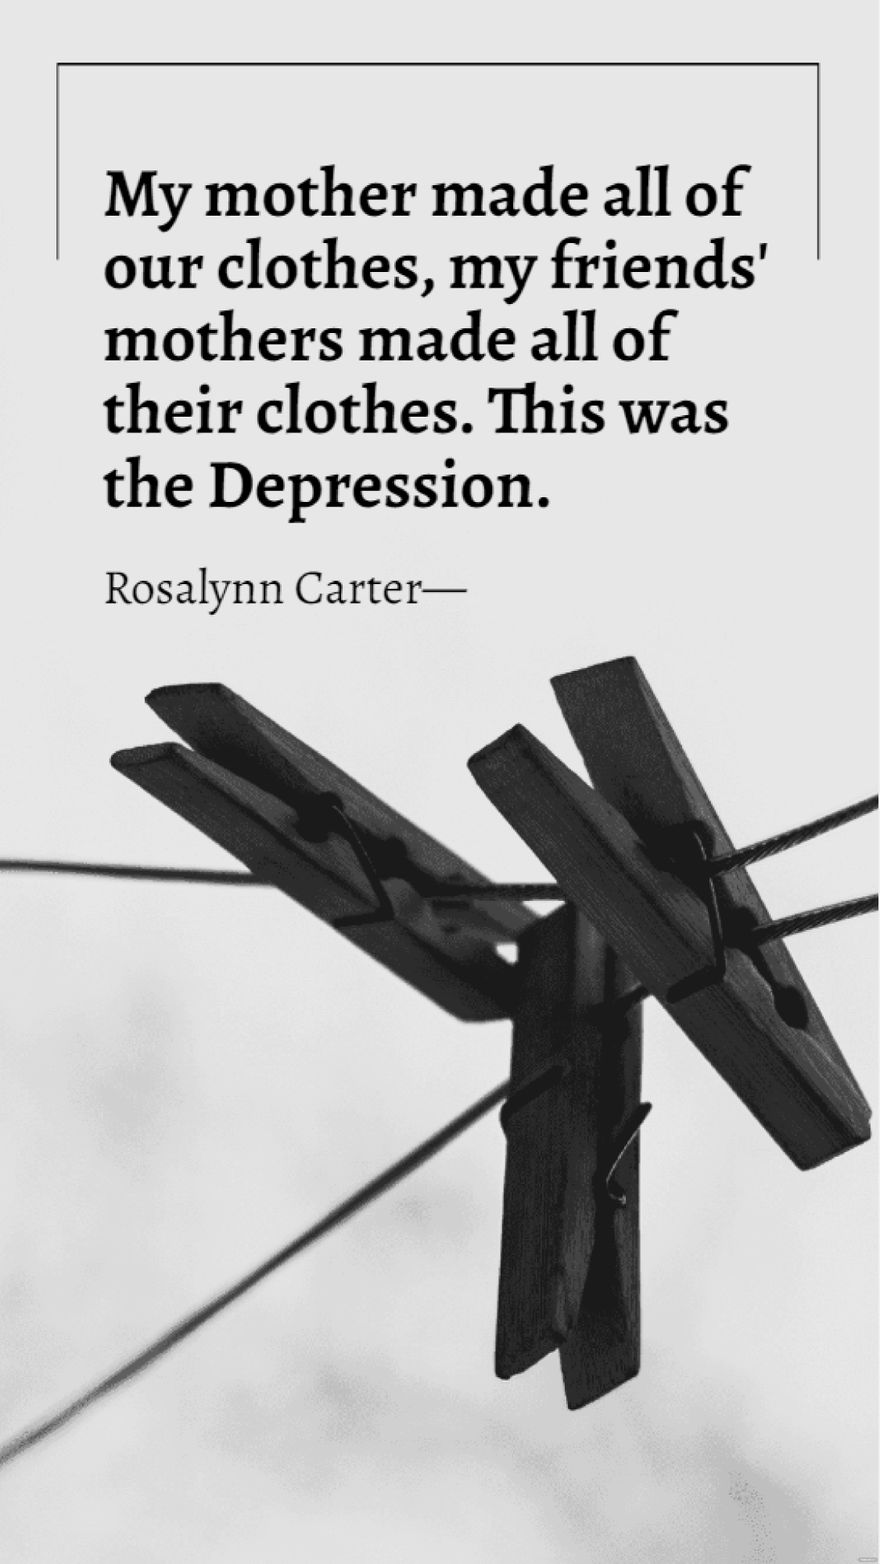 Rosalynn Carter - My mother made all of our clothes, my friends' mothers made all of their clothes. This was the Depression.